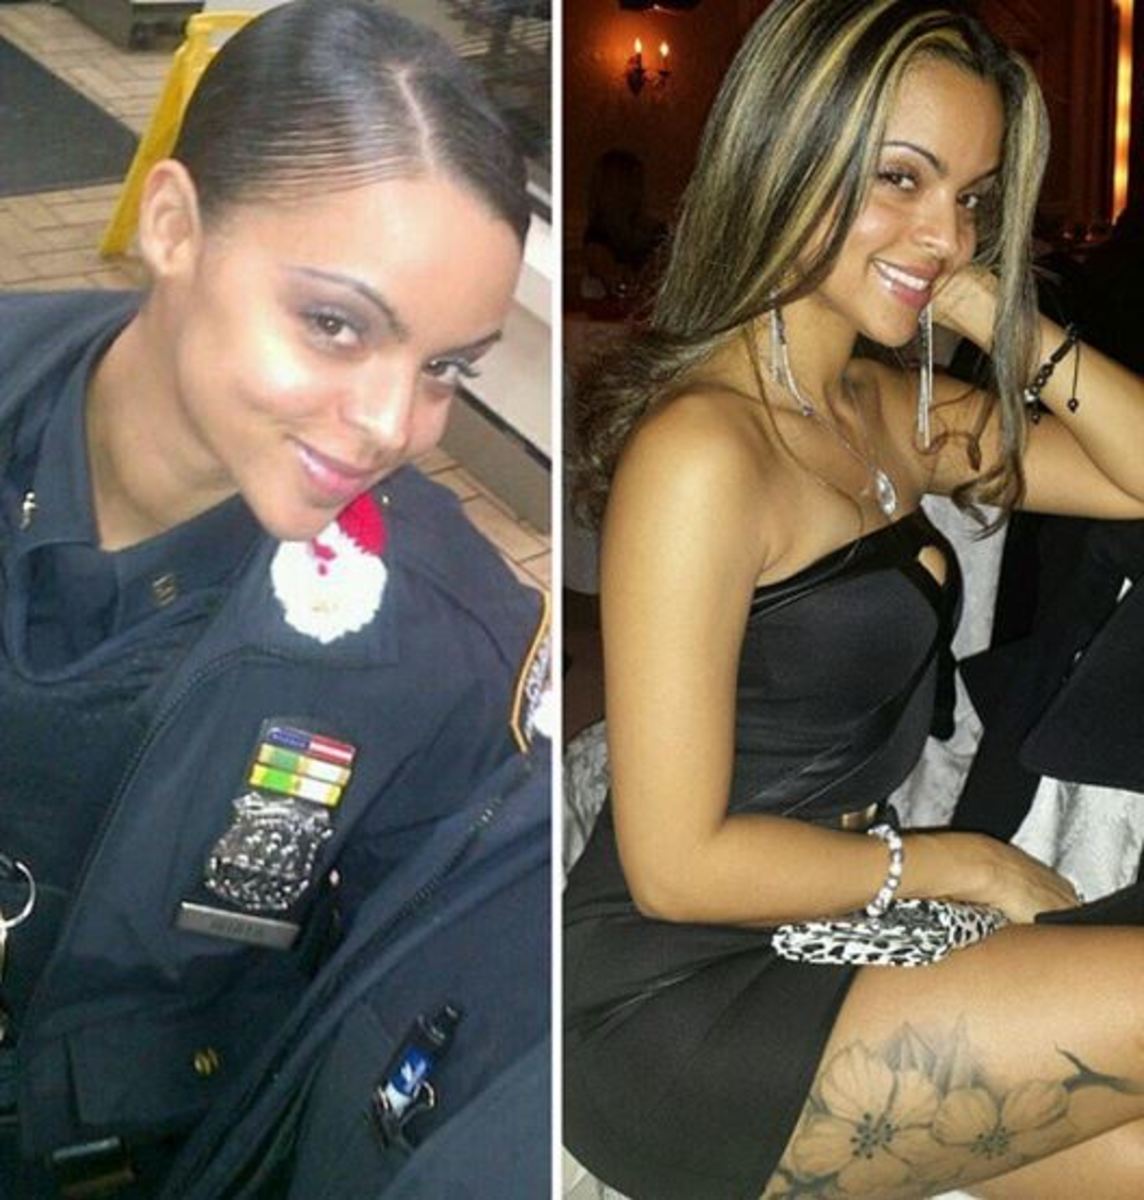 Police sexy officers female Sexy Police